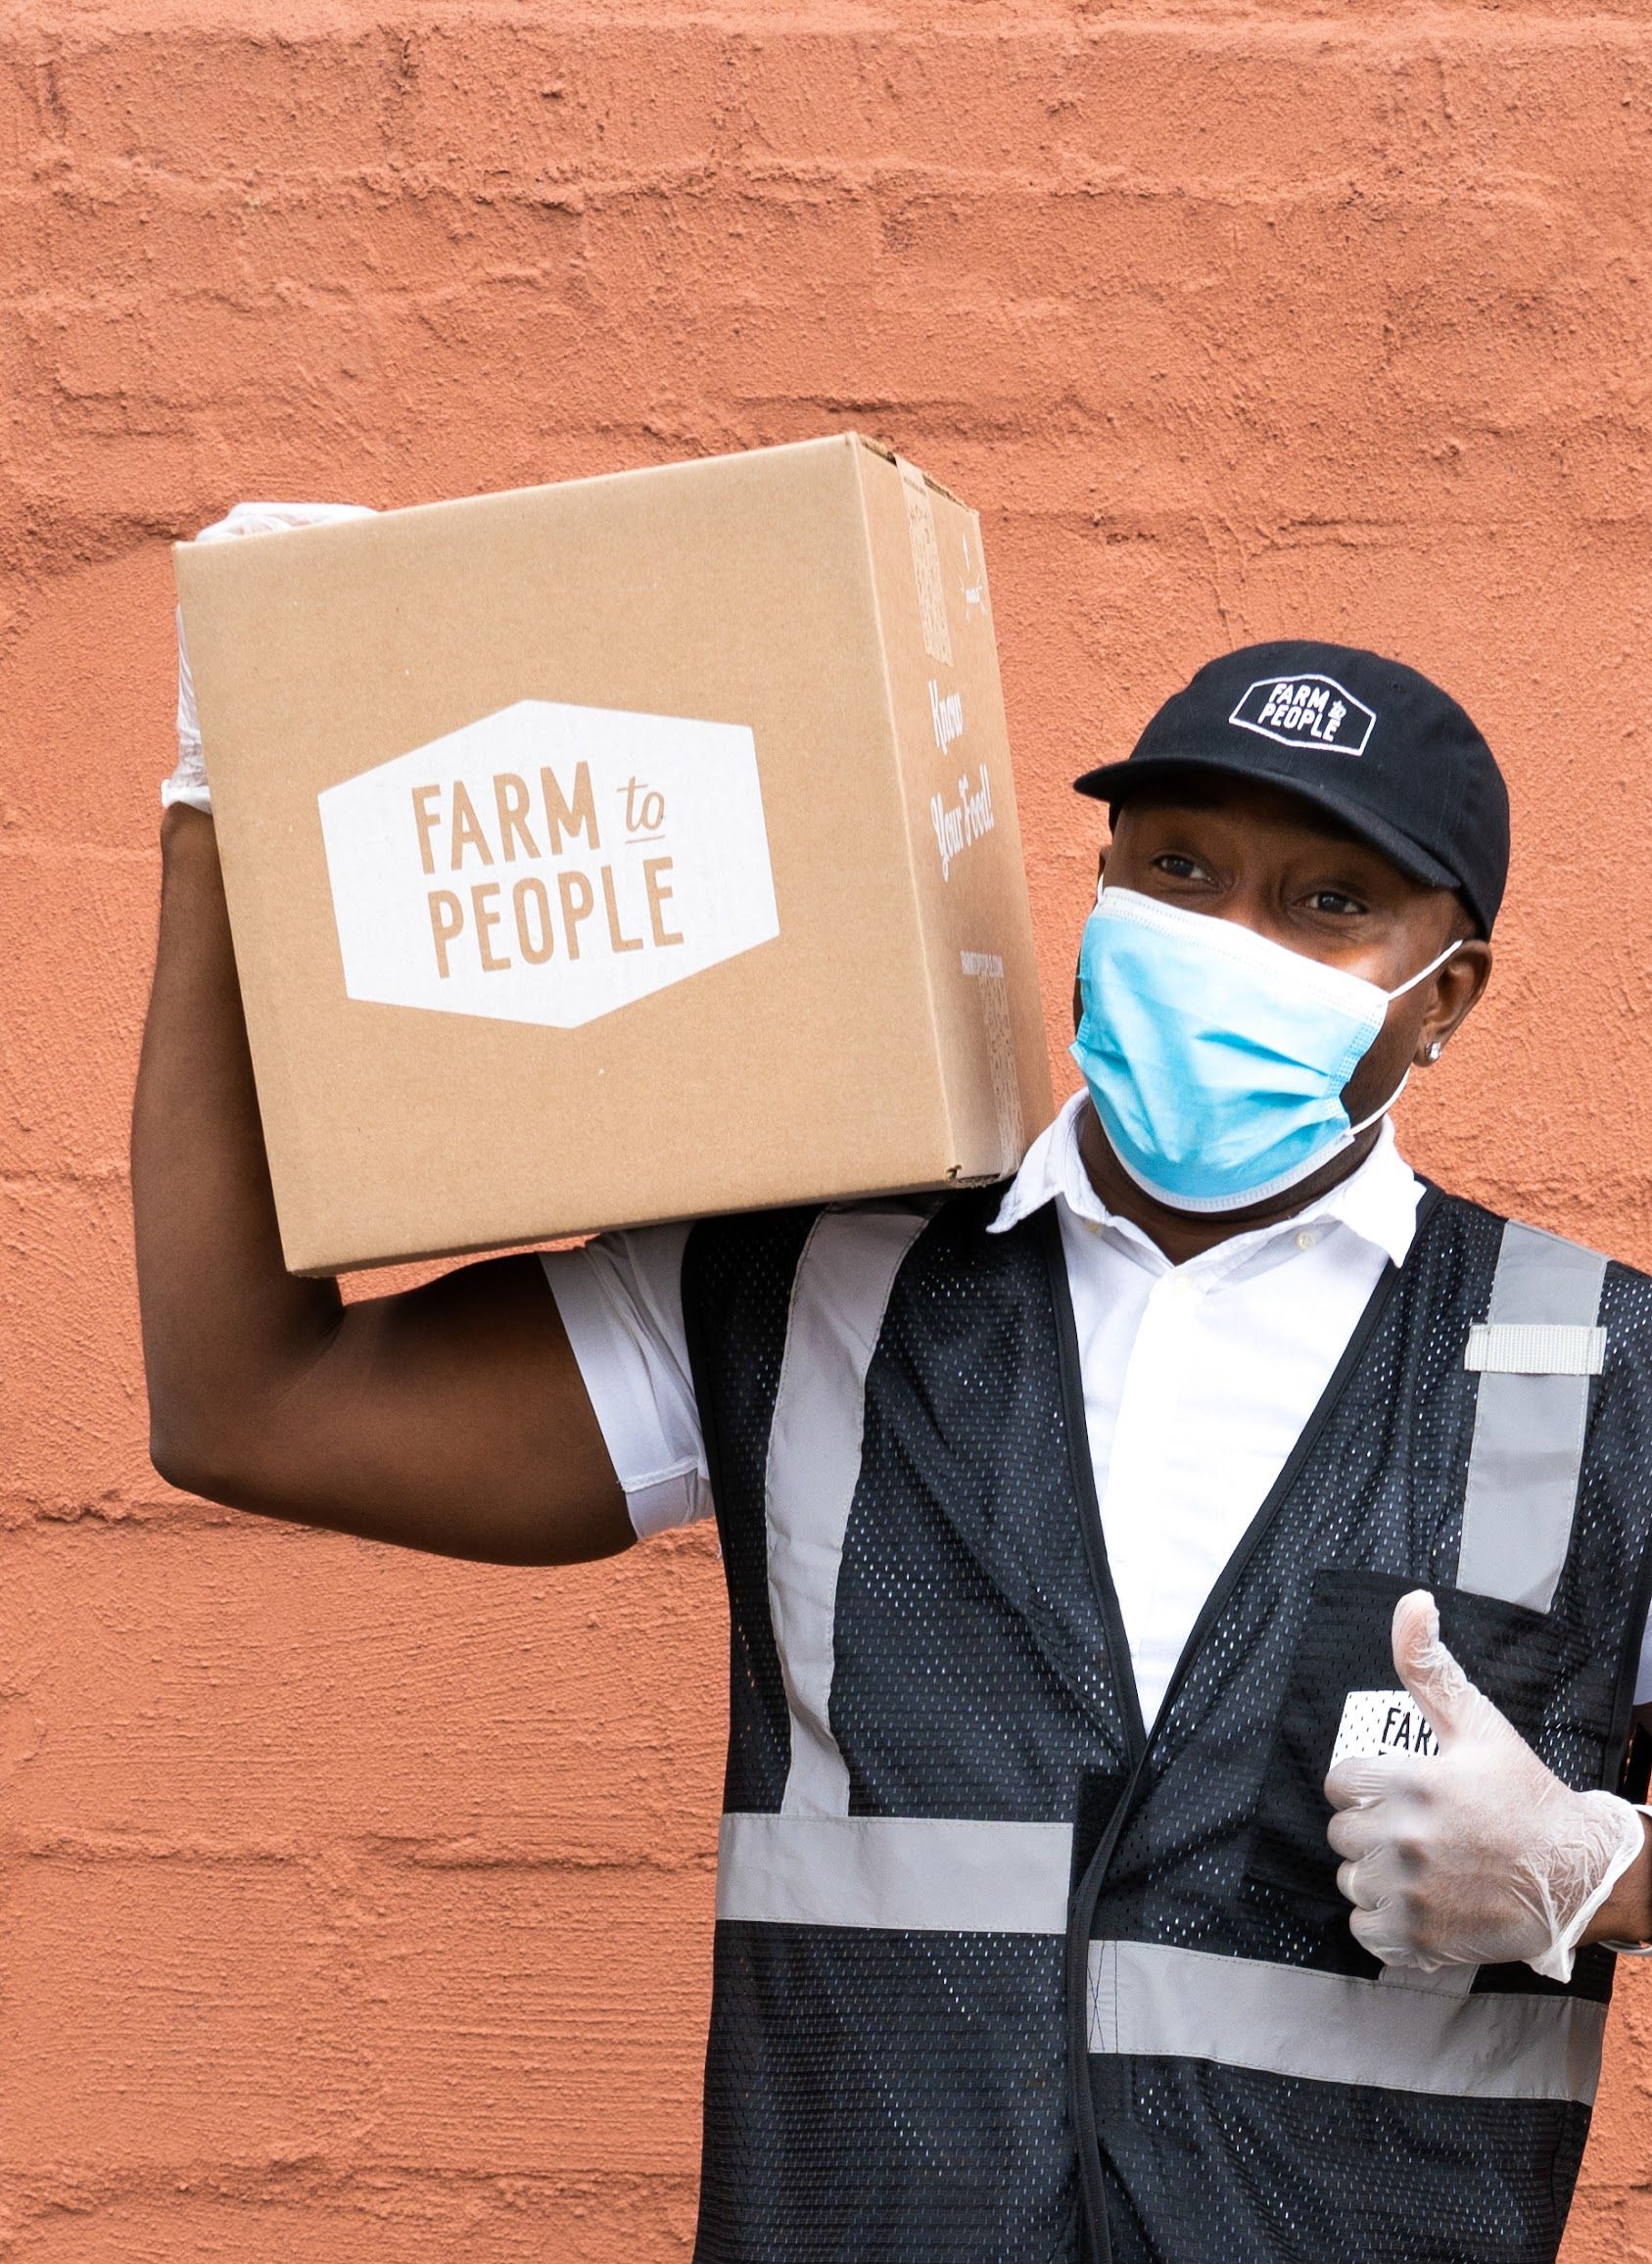 Deliver driver wearing reflective safety vest, mask and gloves while holding a branded Farm To People box on his shoulder